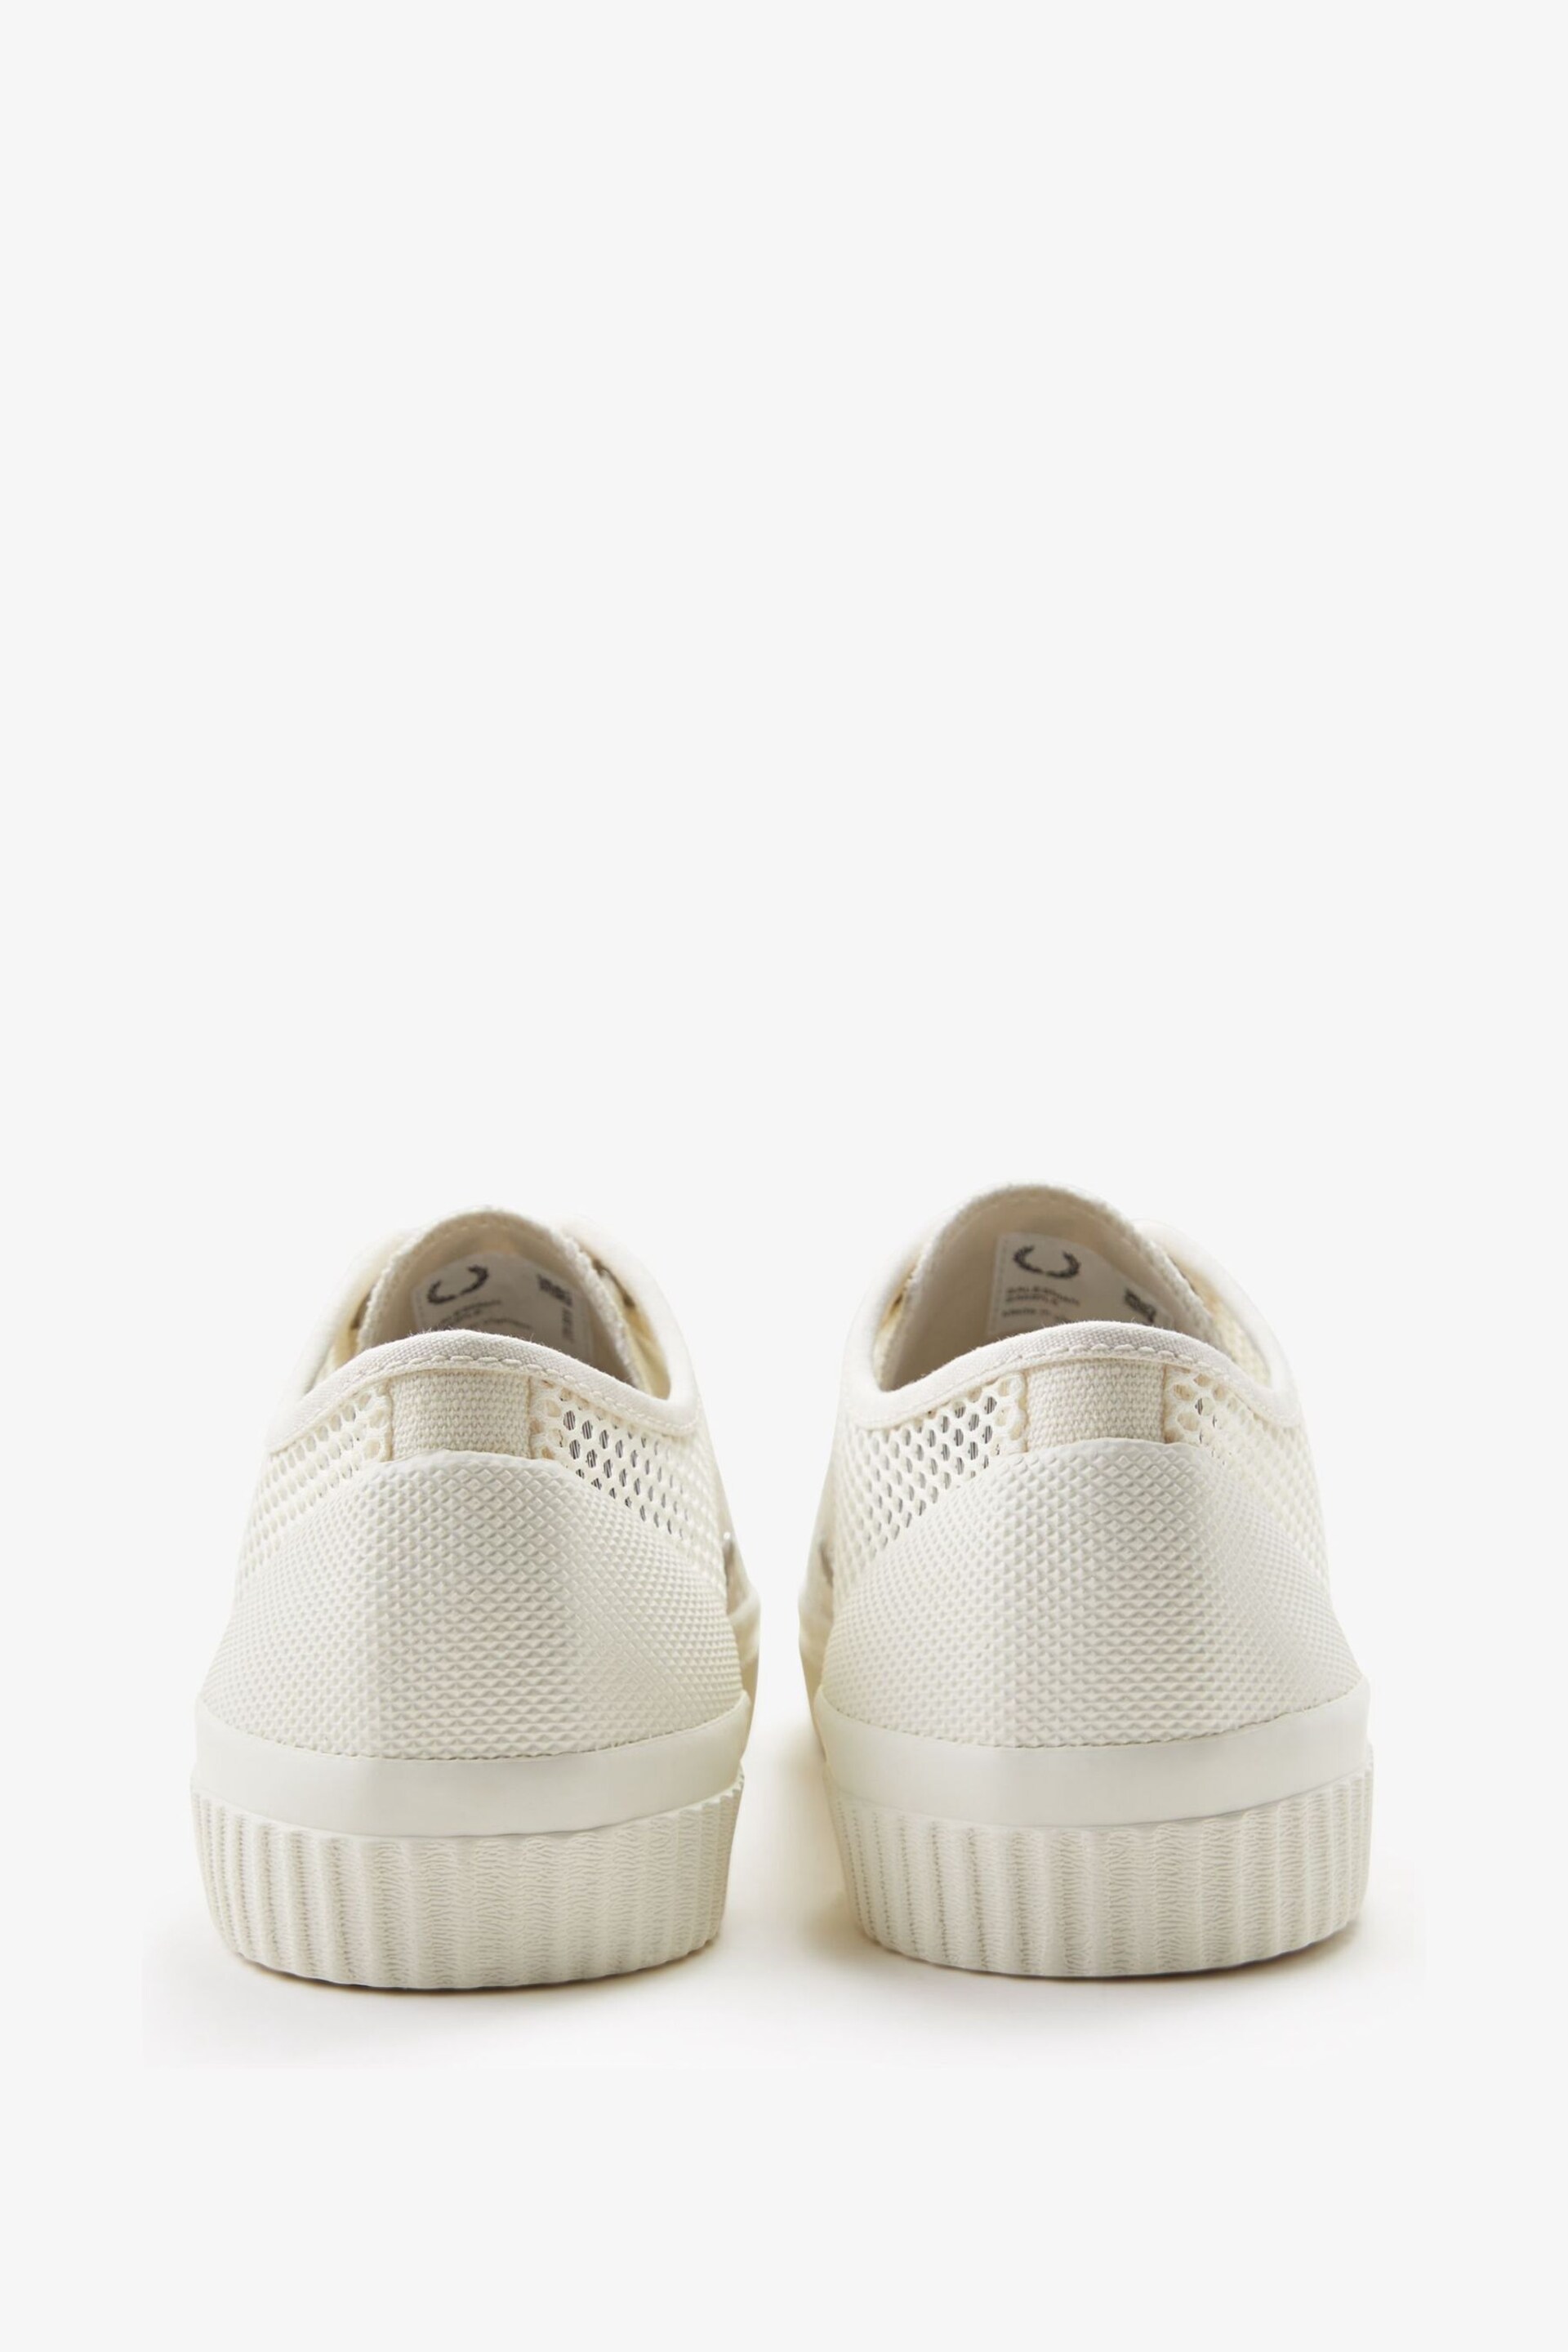 Fred Perry Womens Ecru White Hughes Mesh Trainers - Image 2 of 5